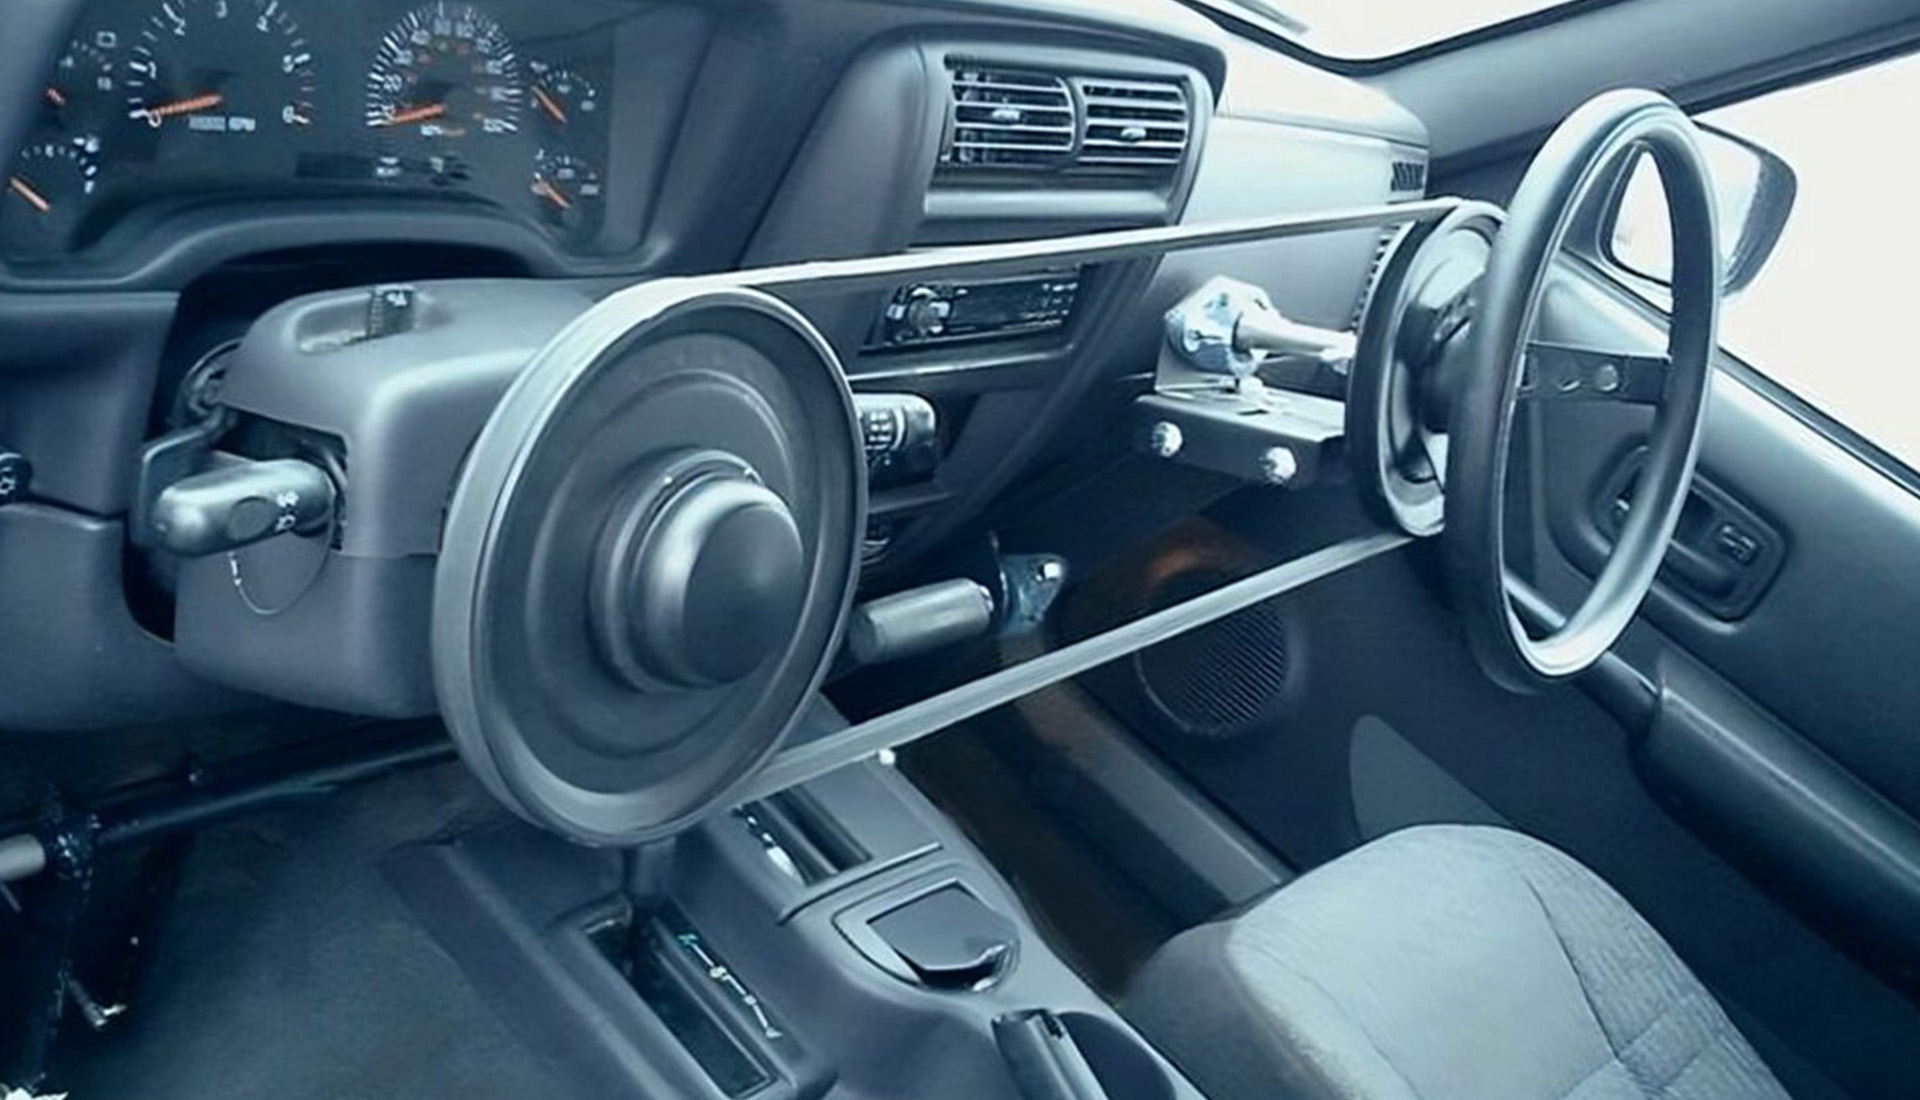 Modern car interior with steering wheel and dashboard.